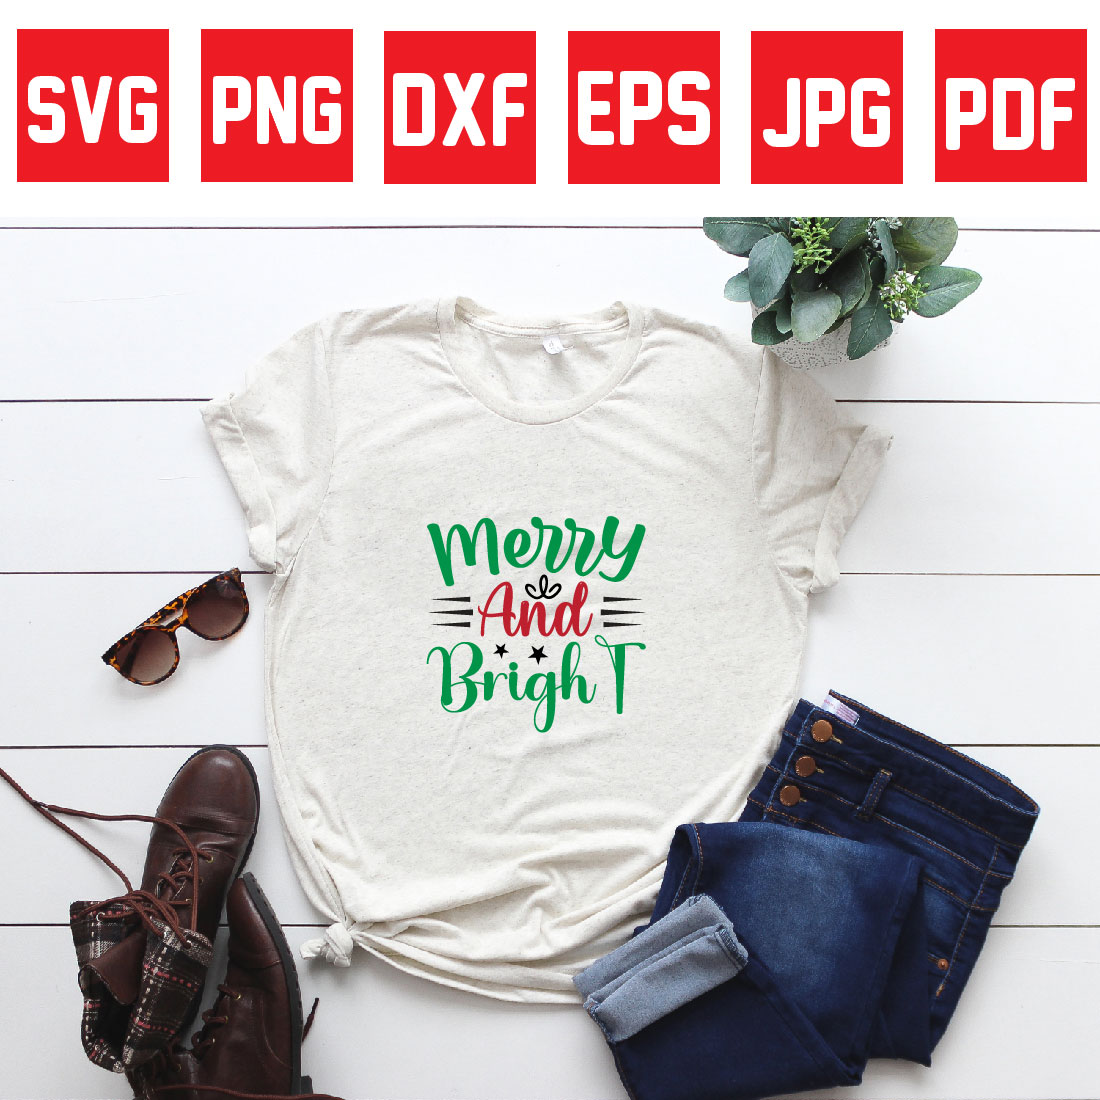 merry and bright preview image.